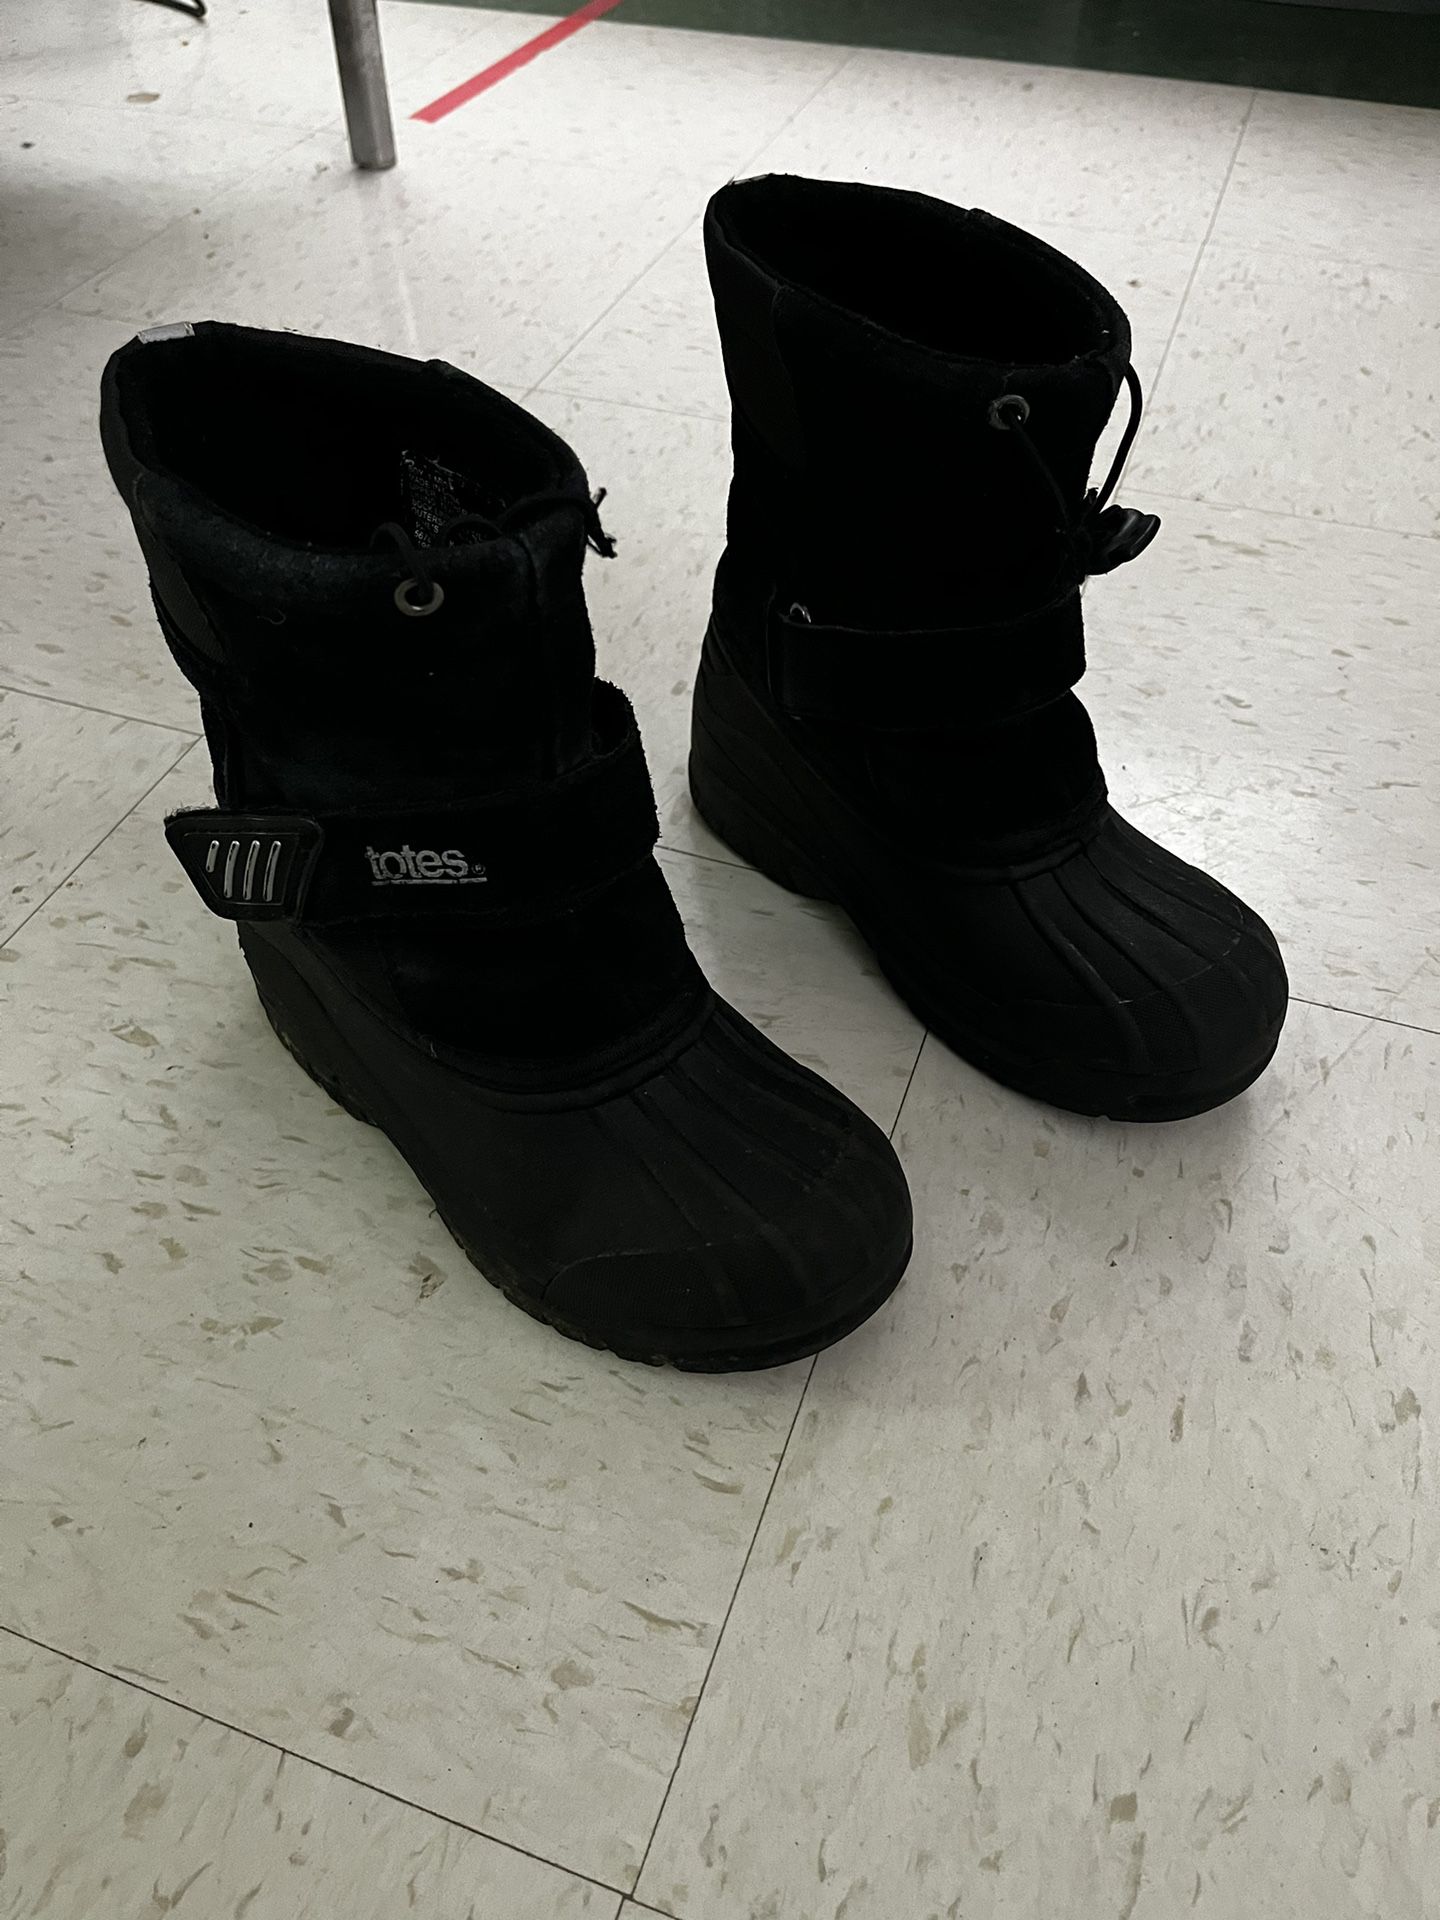 TOTES BOYS BLACK SNOW BOOTS SZ 1 Med Shoes